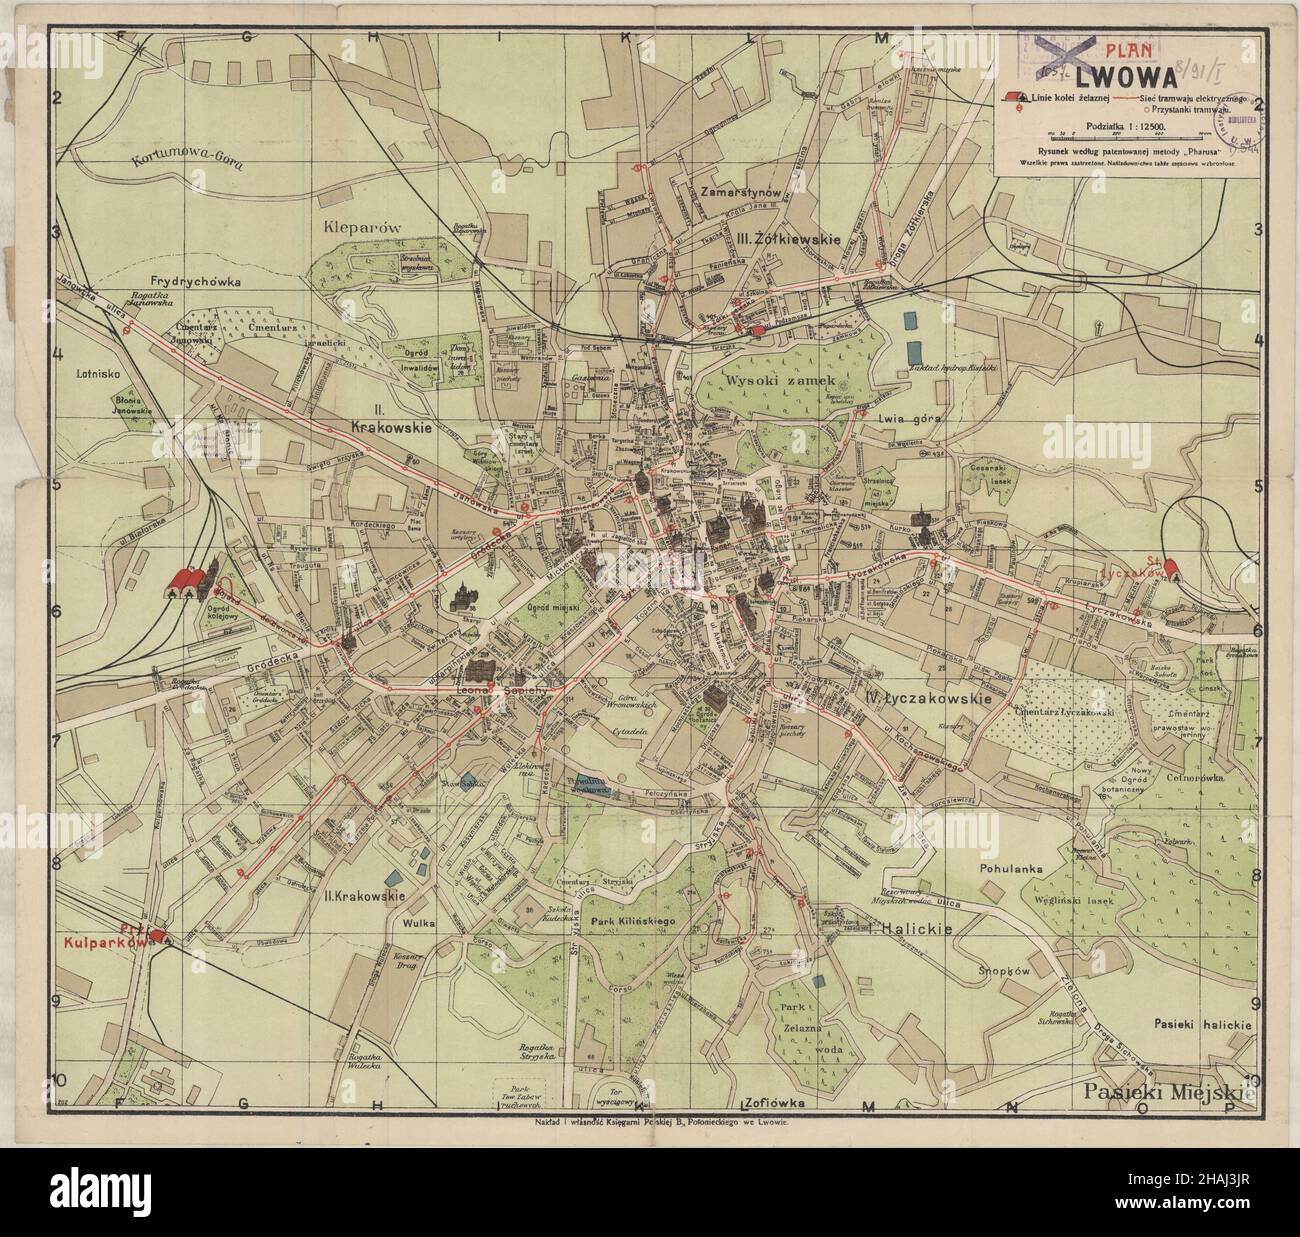 Lwow Map, Map of Lwow, Lwów Map, Lviv Map, Map of Lviv, Lvov Map, Lviv Plan, Lviv City Plan, Lviv Poster, Ukraine Map, Map of Ukraine, Ukraine Print Stock Photo